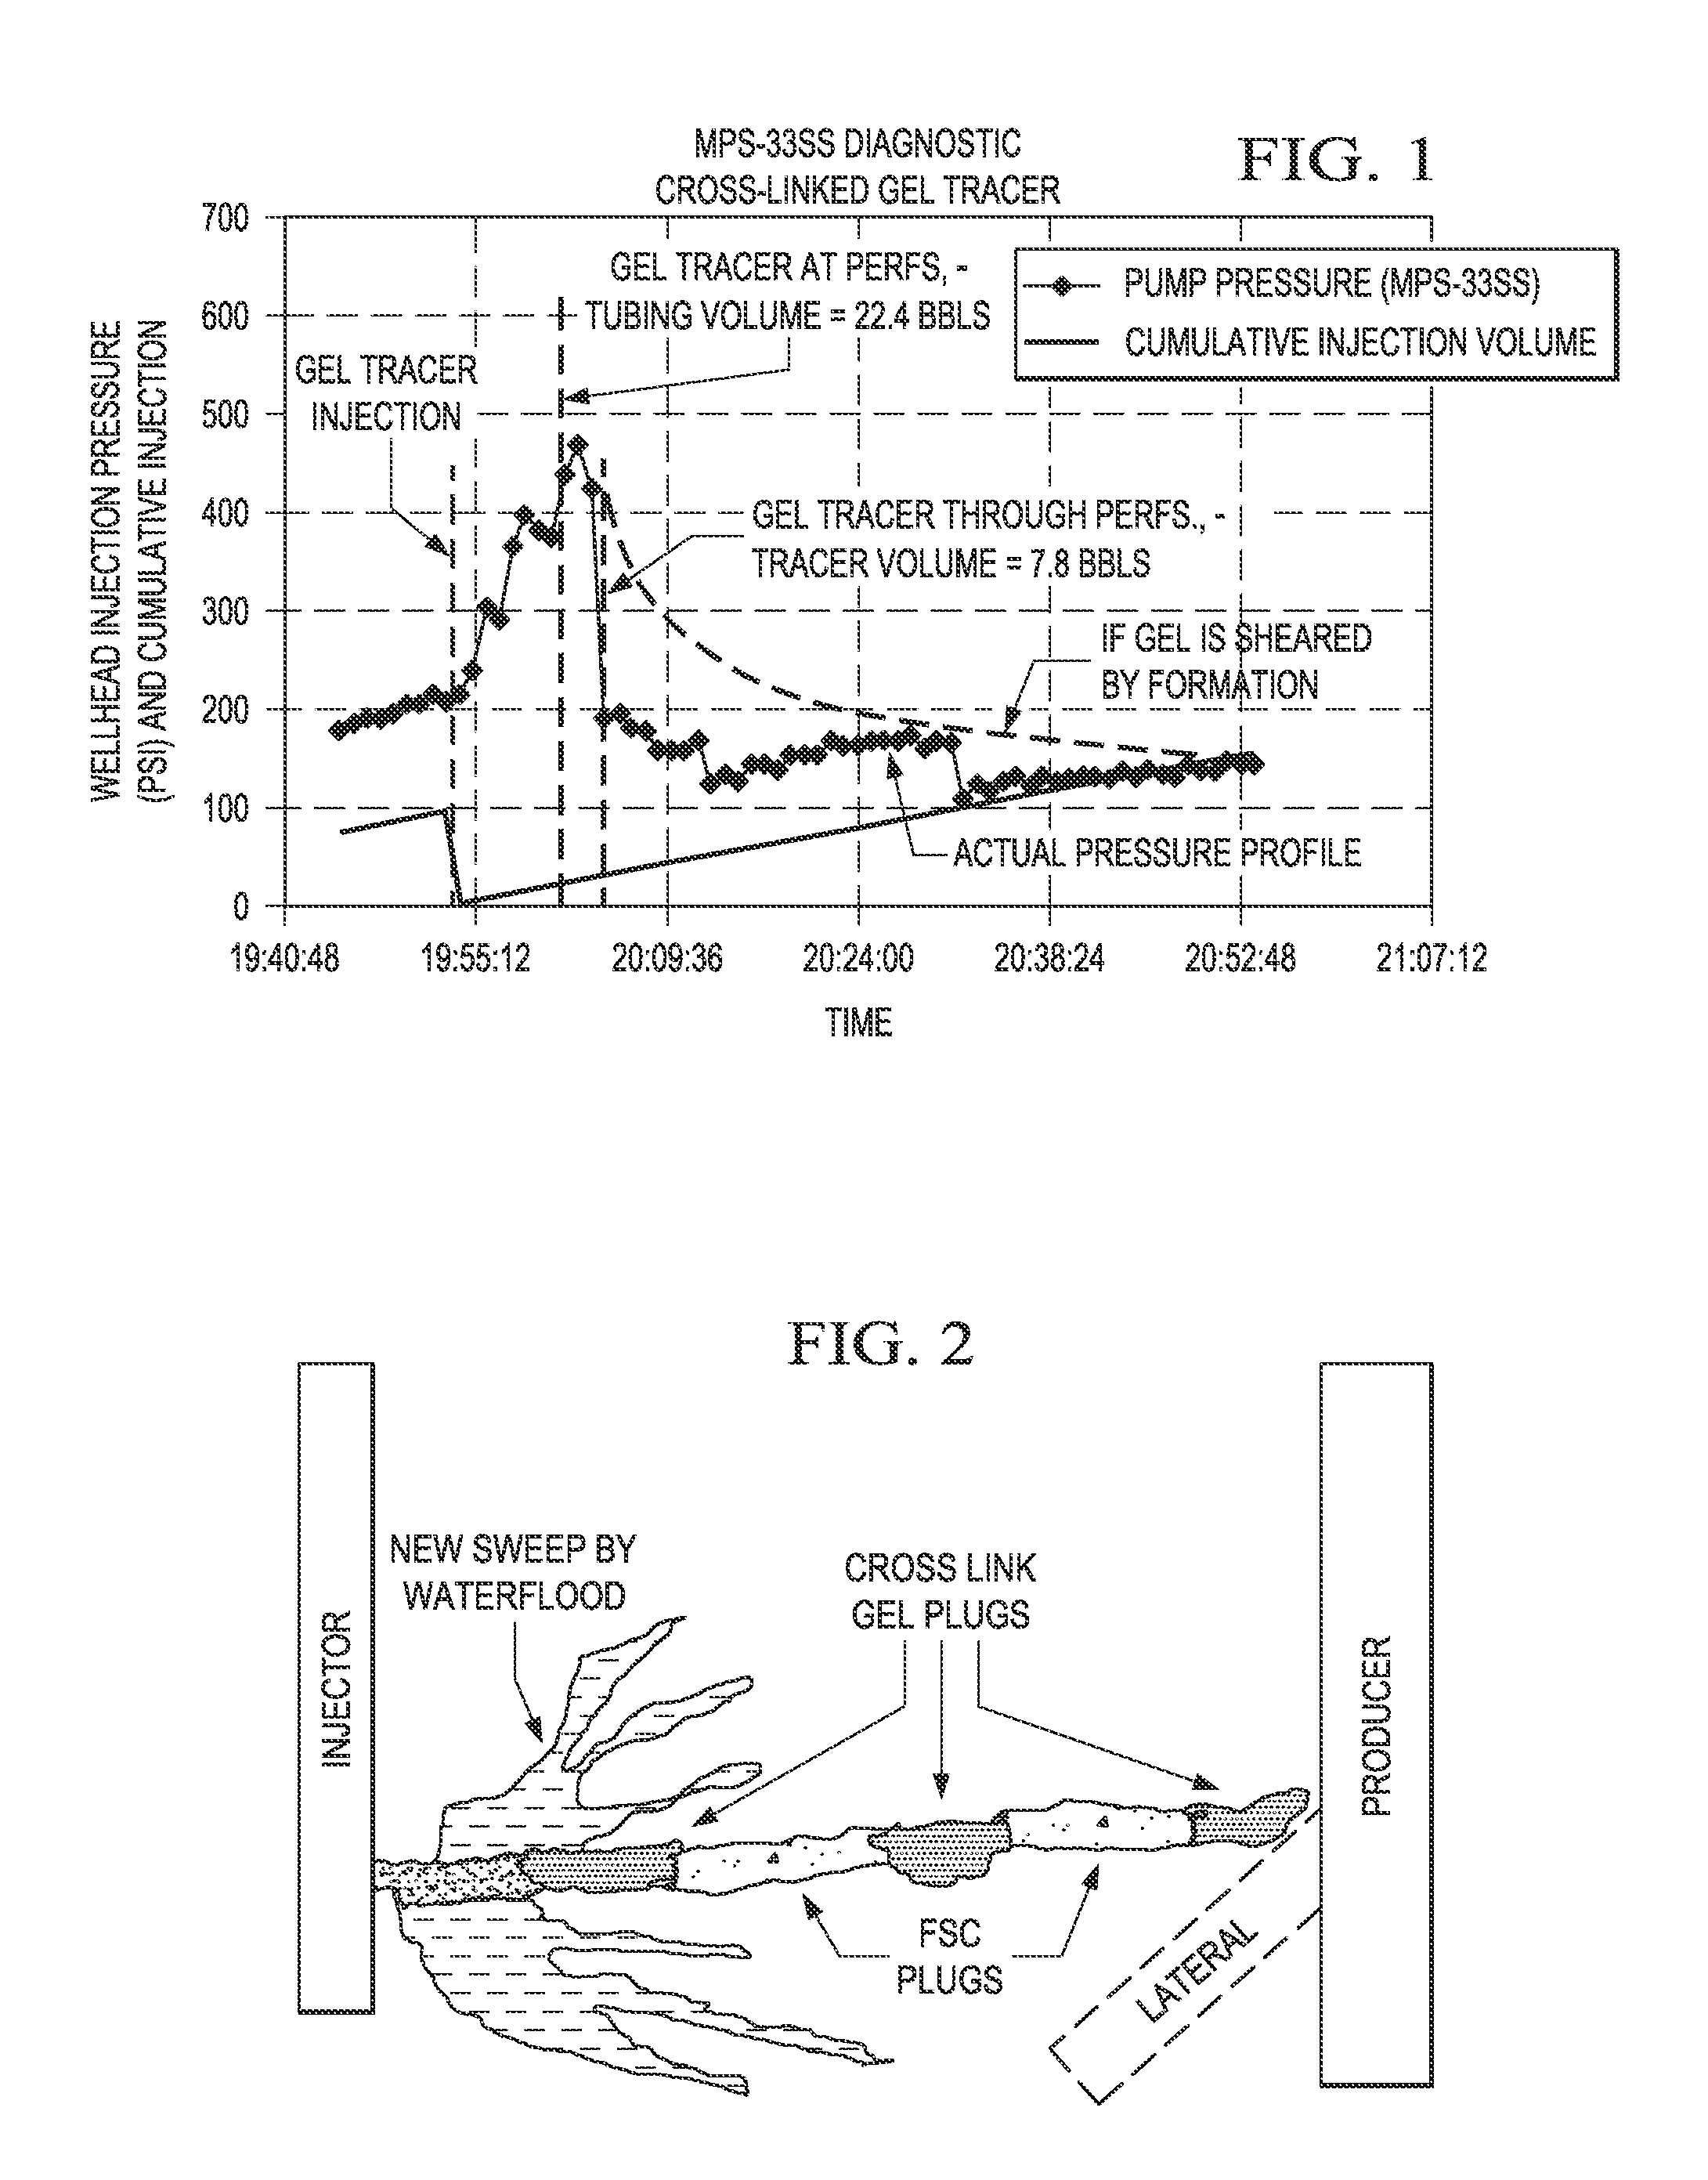 Method to Control Driving Fluid Breakthrough During Production of Hydrocarbons from a Subterranean Reservoir